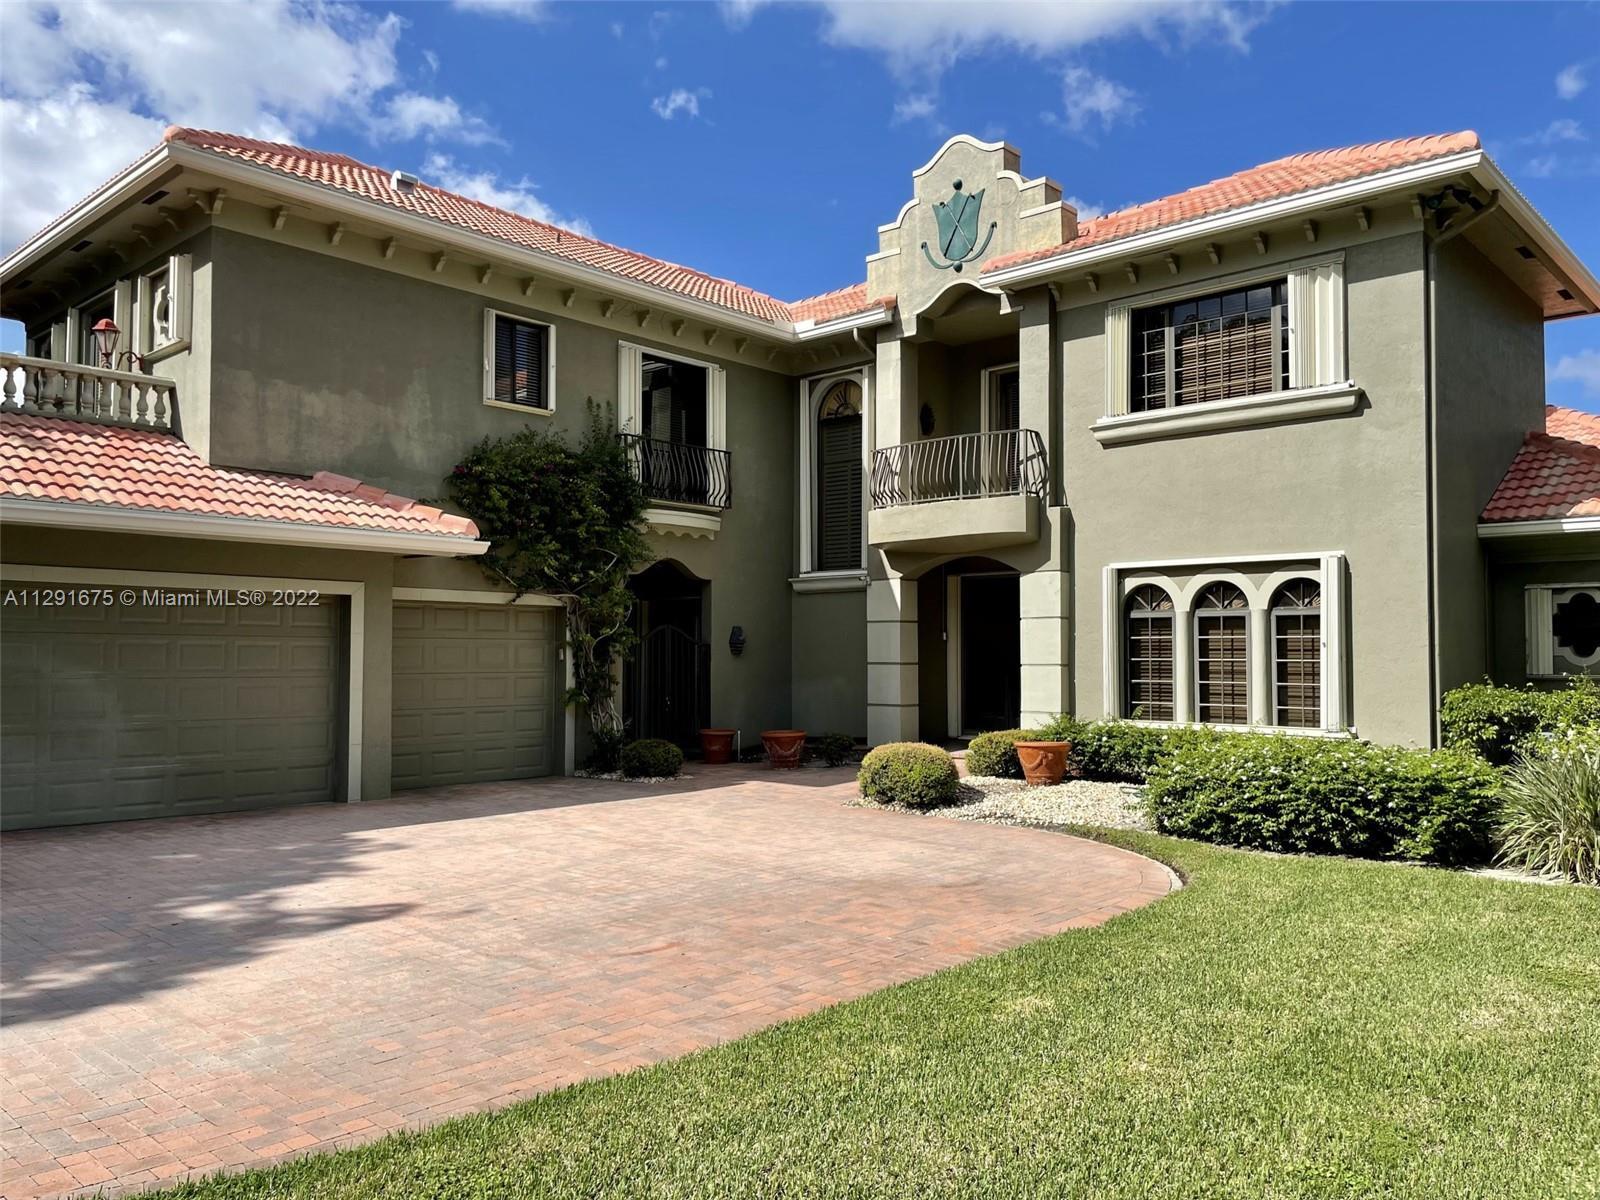 Estate home located in the Chateau section of Boca Grove. Oversized lot with magnificent lake and go